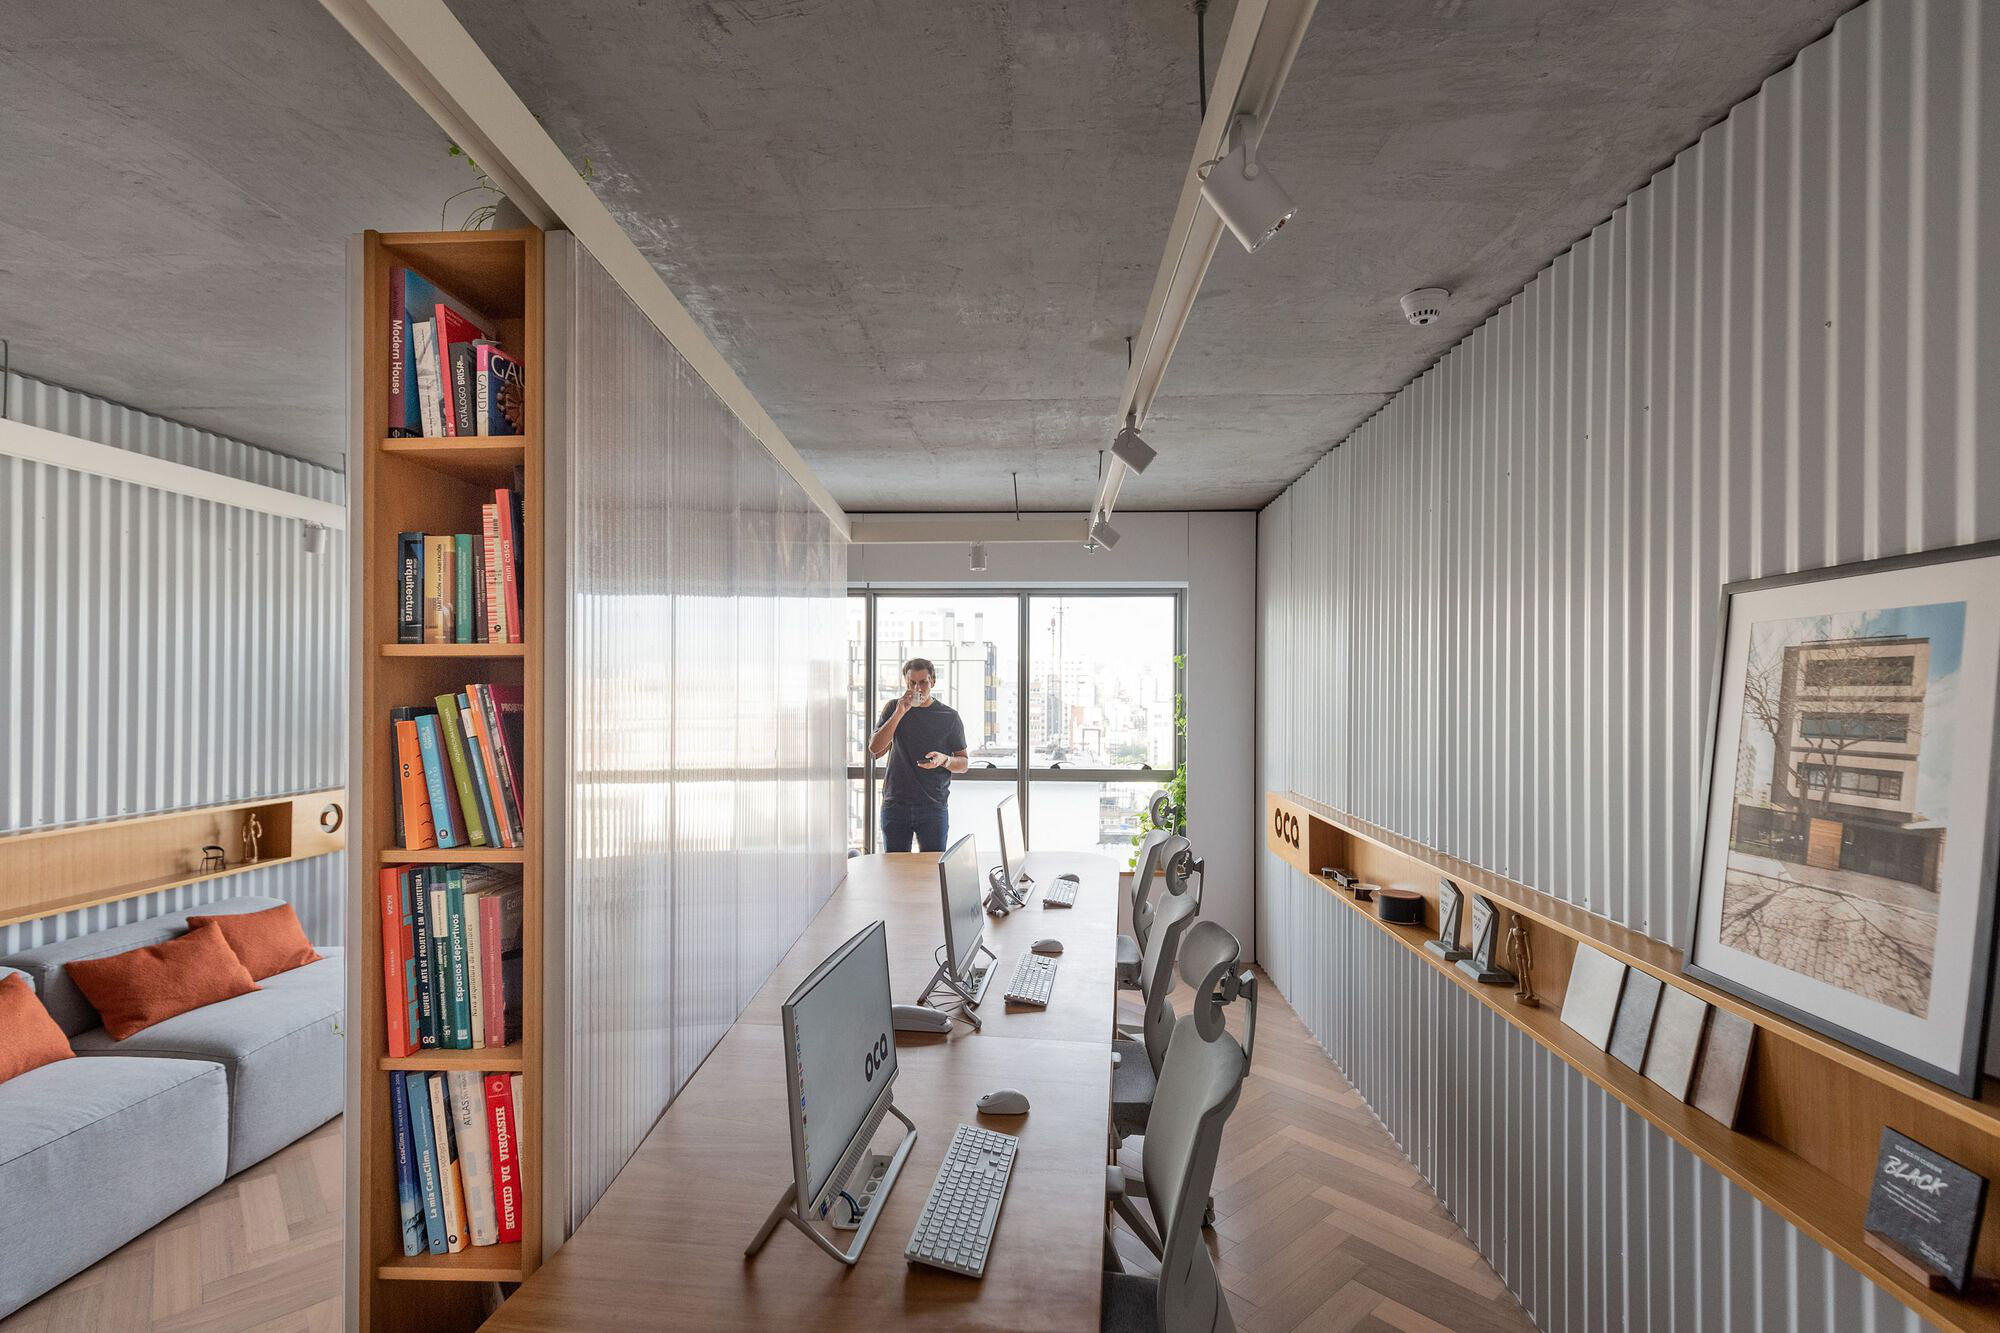 Micro-office spaces for the modern small business